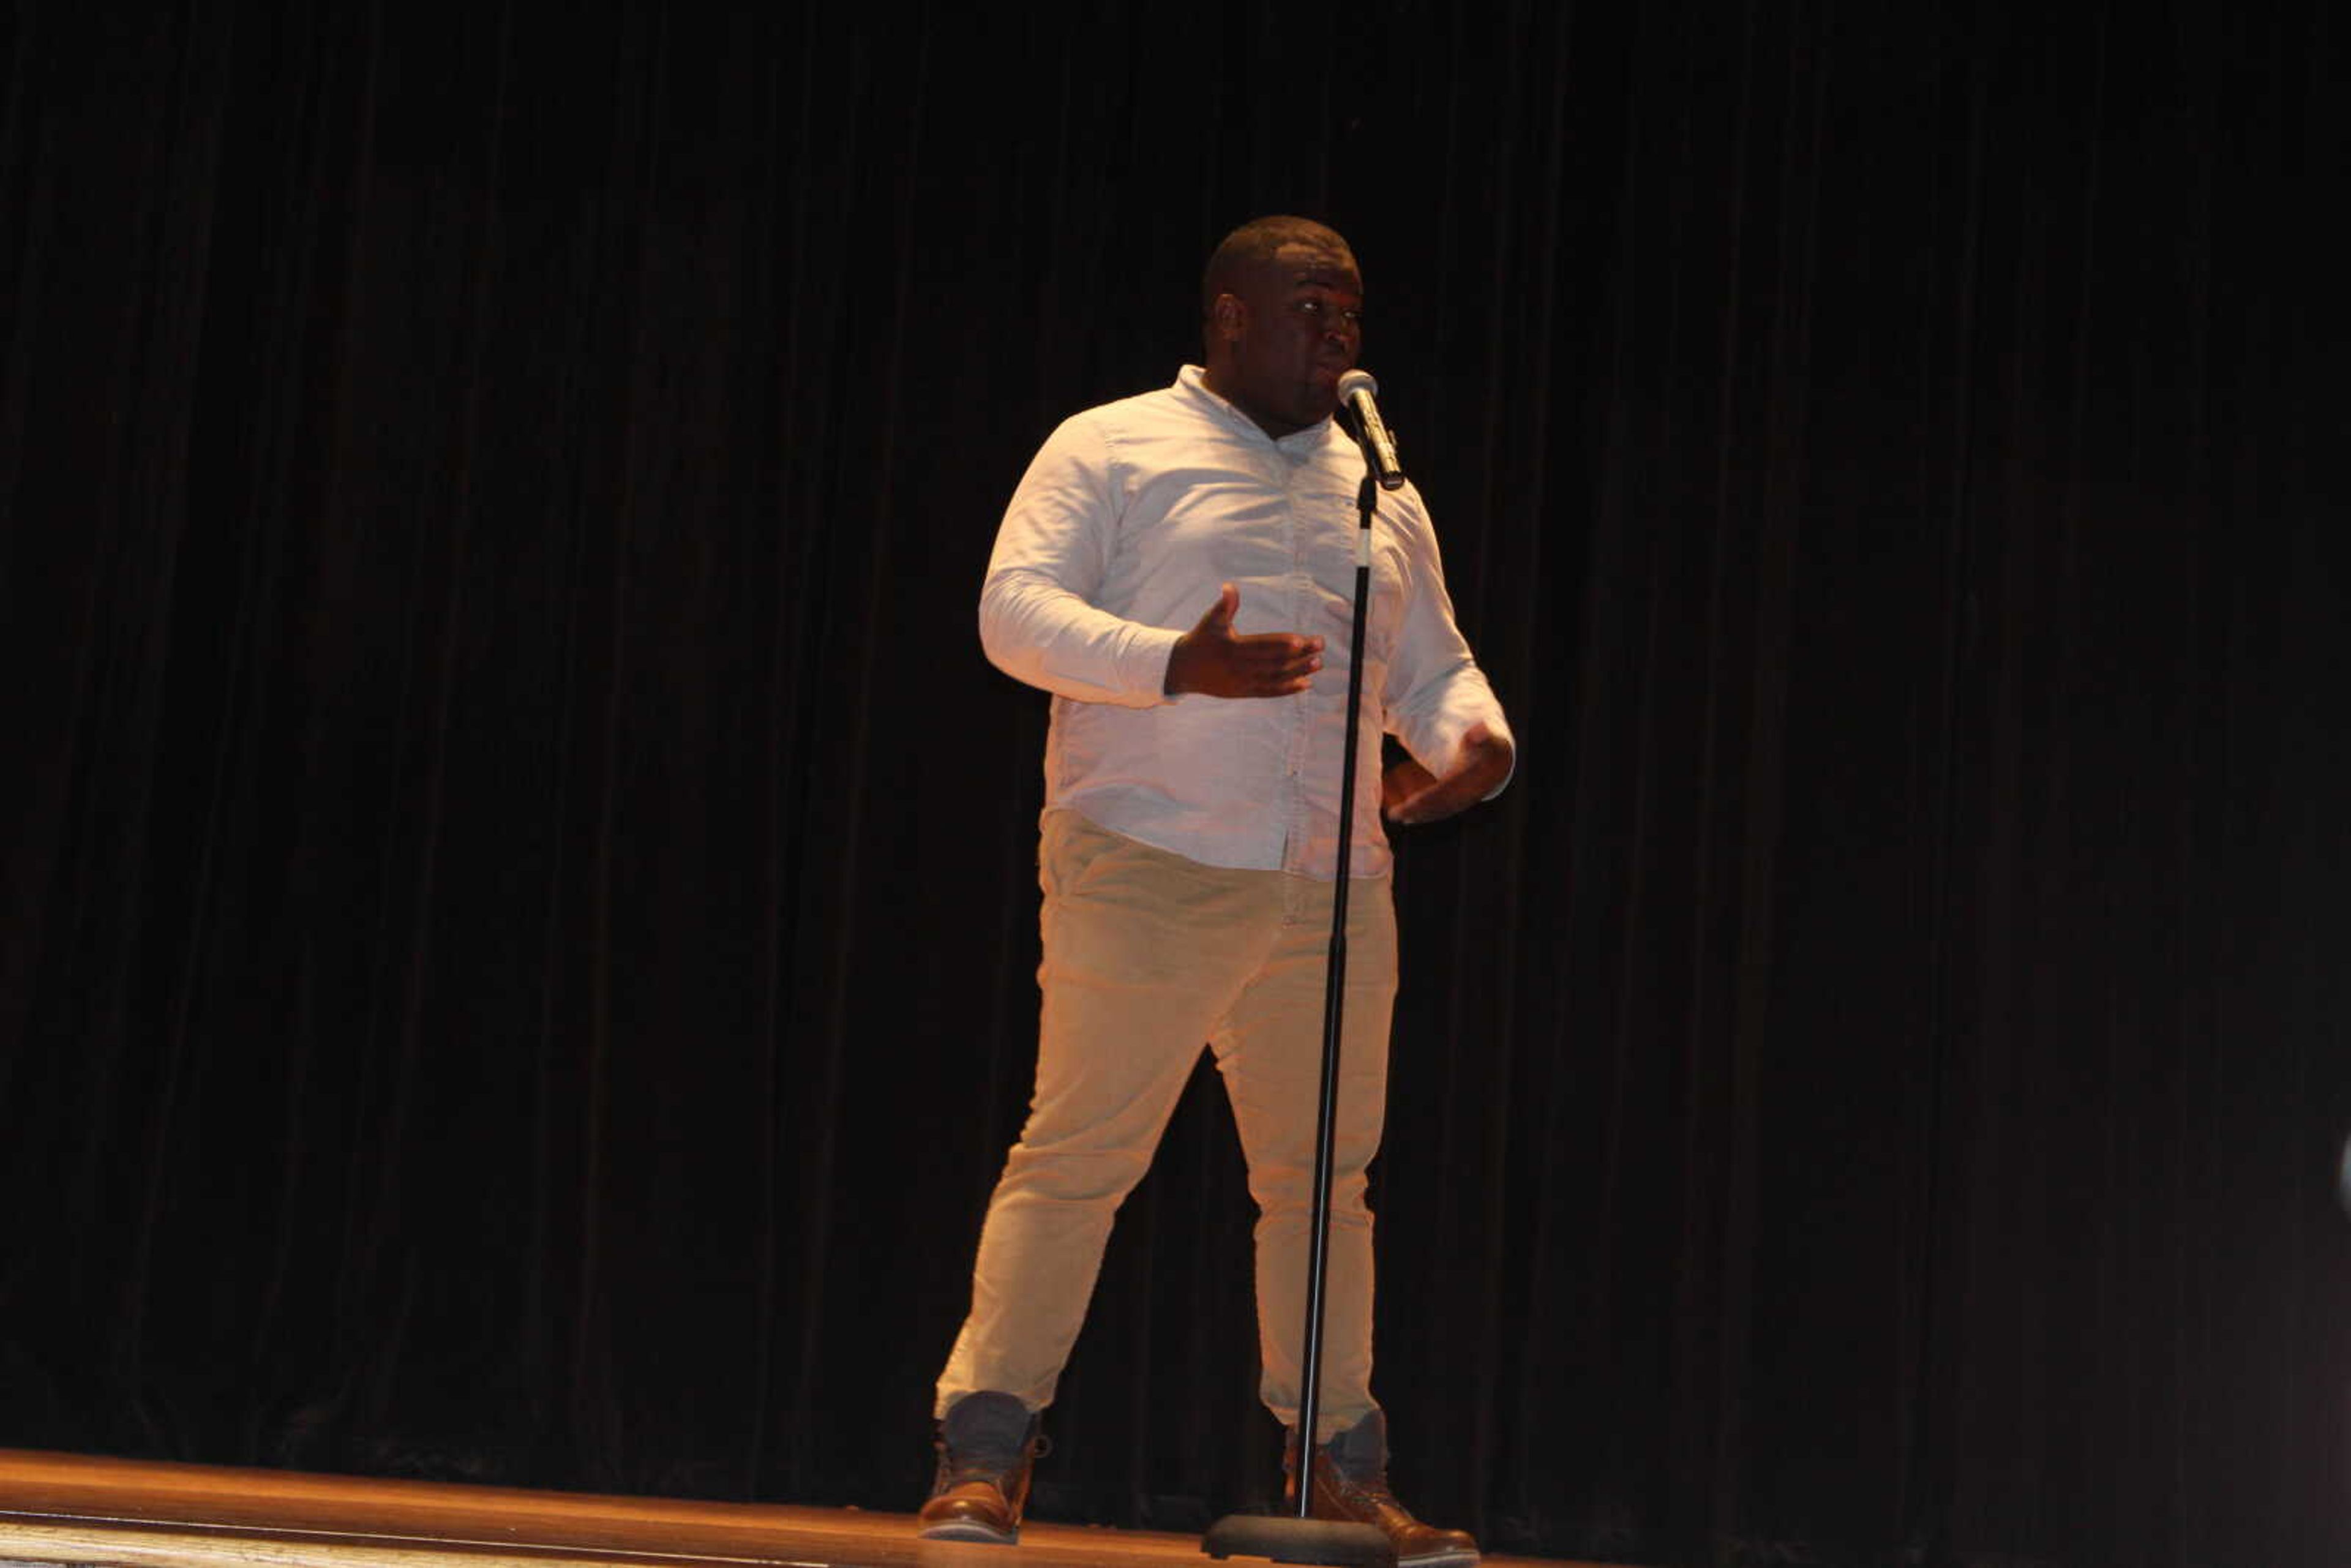 Senior Keyeon Pitts sang "My Shot" from the Broadway musical "Hamilton" at the Homecoming Planning Committee's annual talent show at 7 p.m. on Nov. 2 in the Academic Hall auditorium.